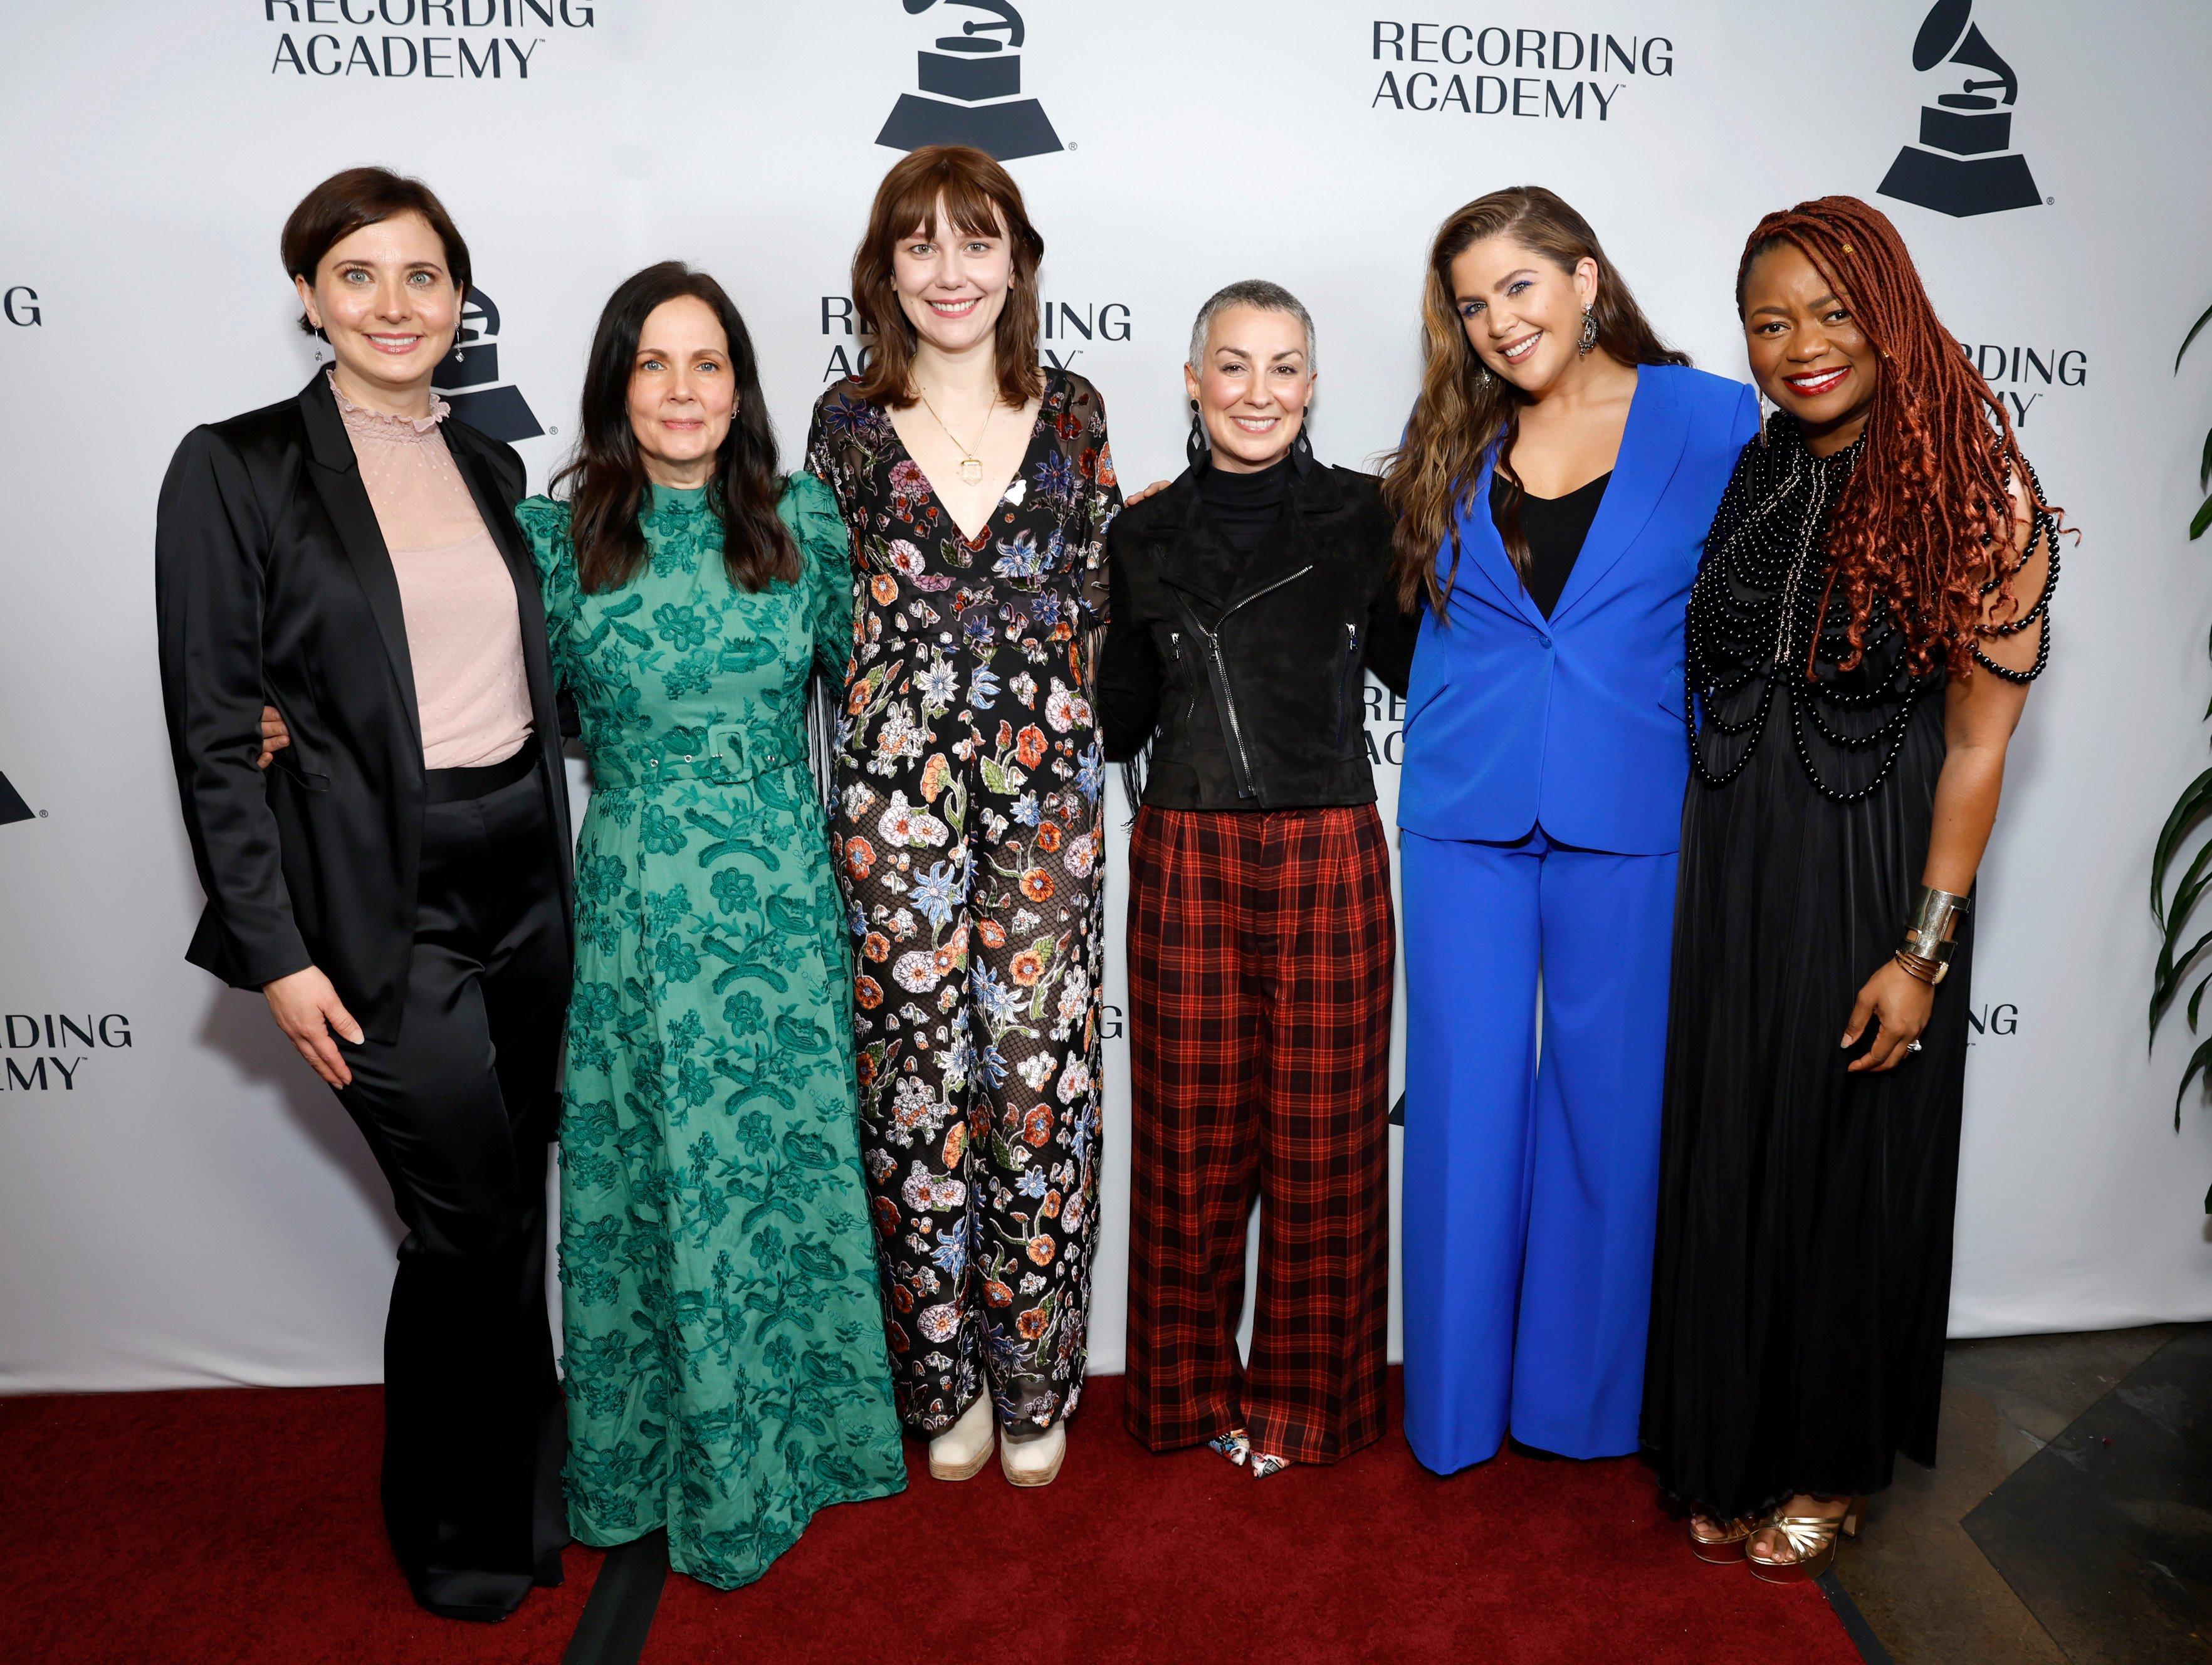 A Look Inside The 2023 Recording Academy Nashville Chapter Nominee Celebration, A Tribute To Its Supportive Musical Community GRAMMY